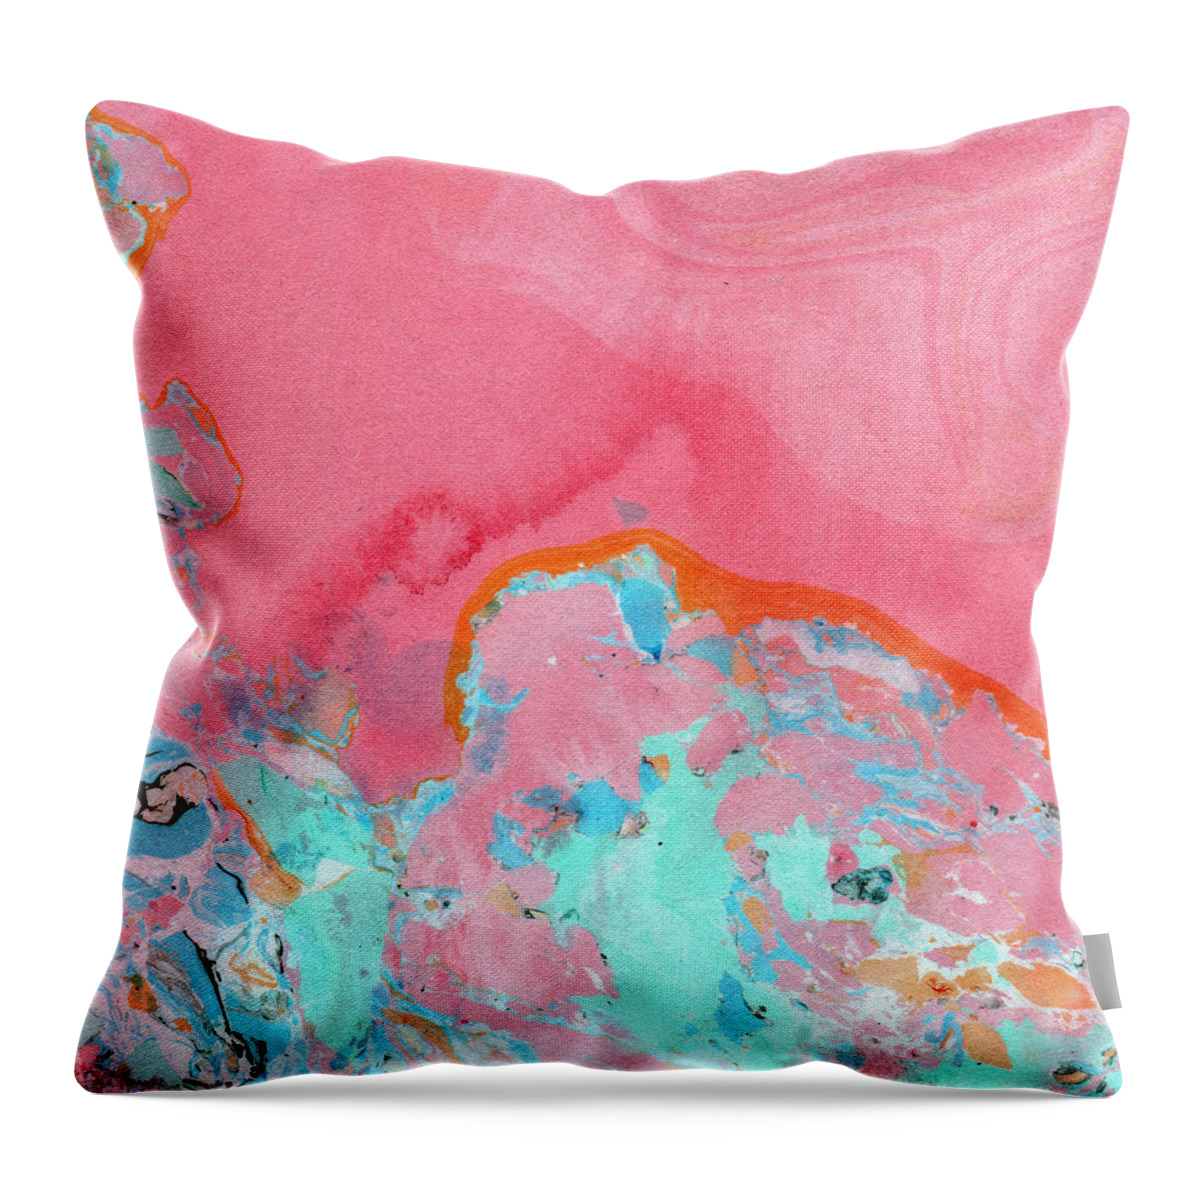 Abstract Throw Pillow featuring the painting Somewhere New- Abstract Art by Linda Woods by Linda Woods